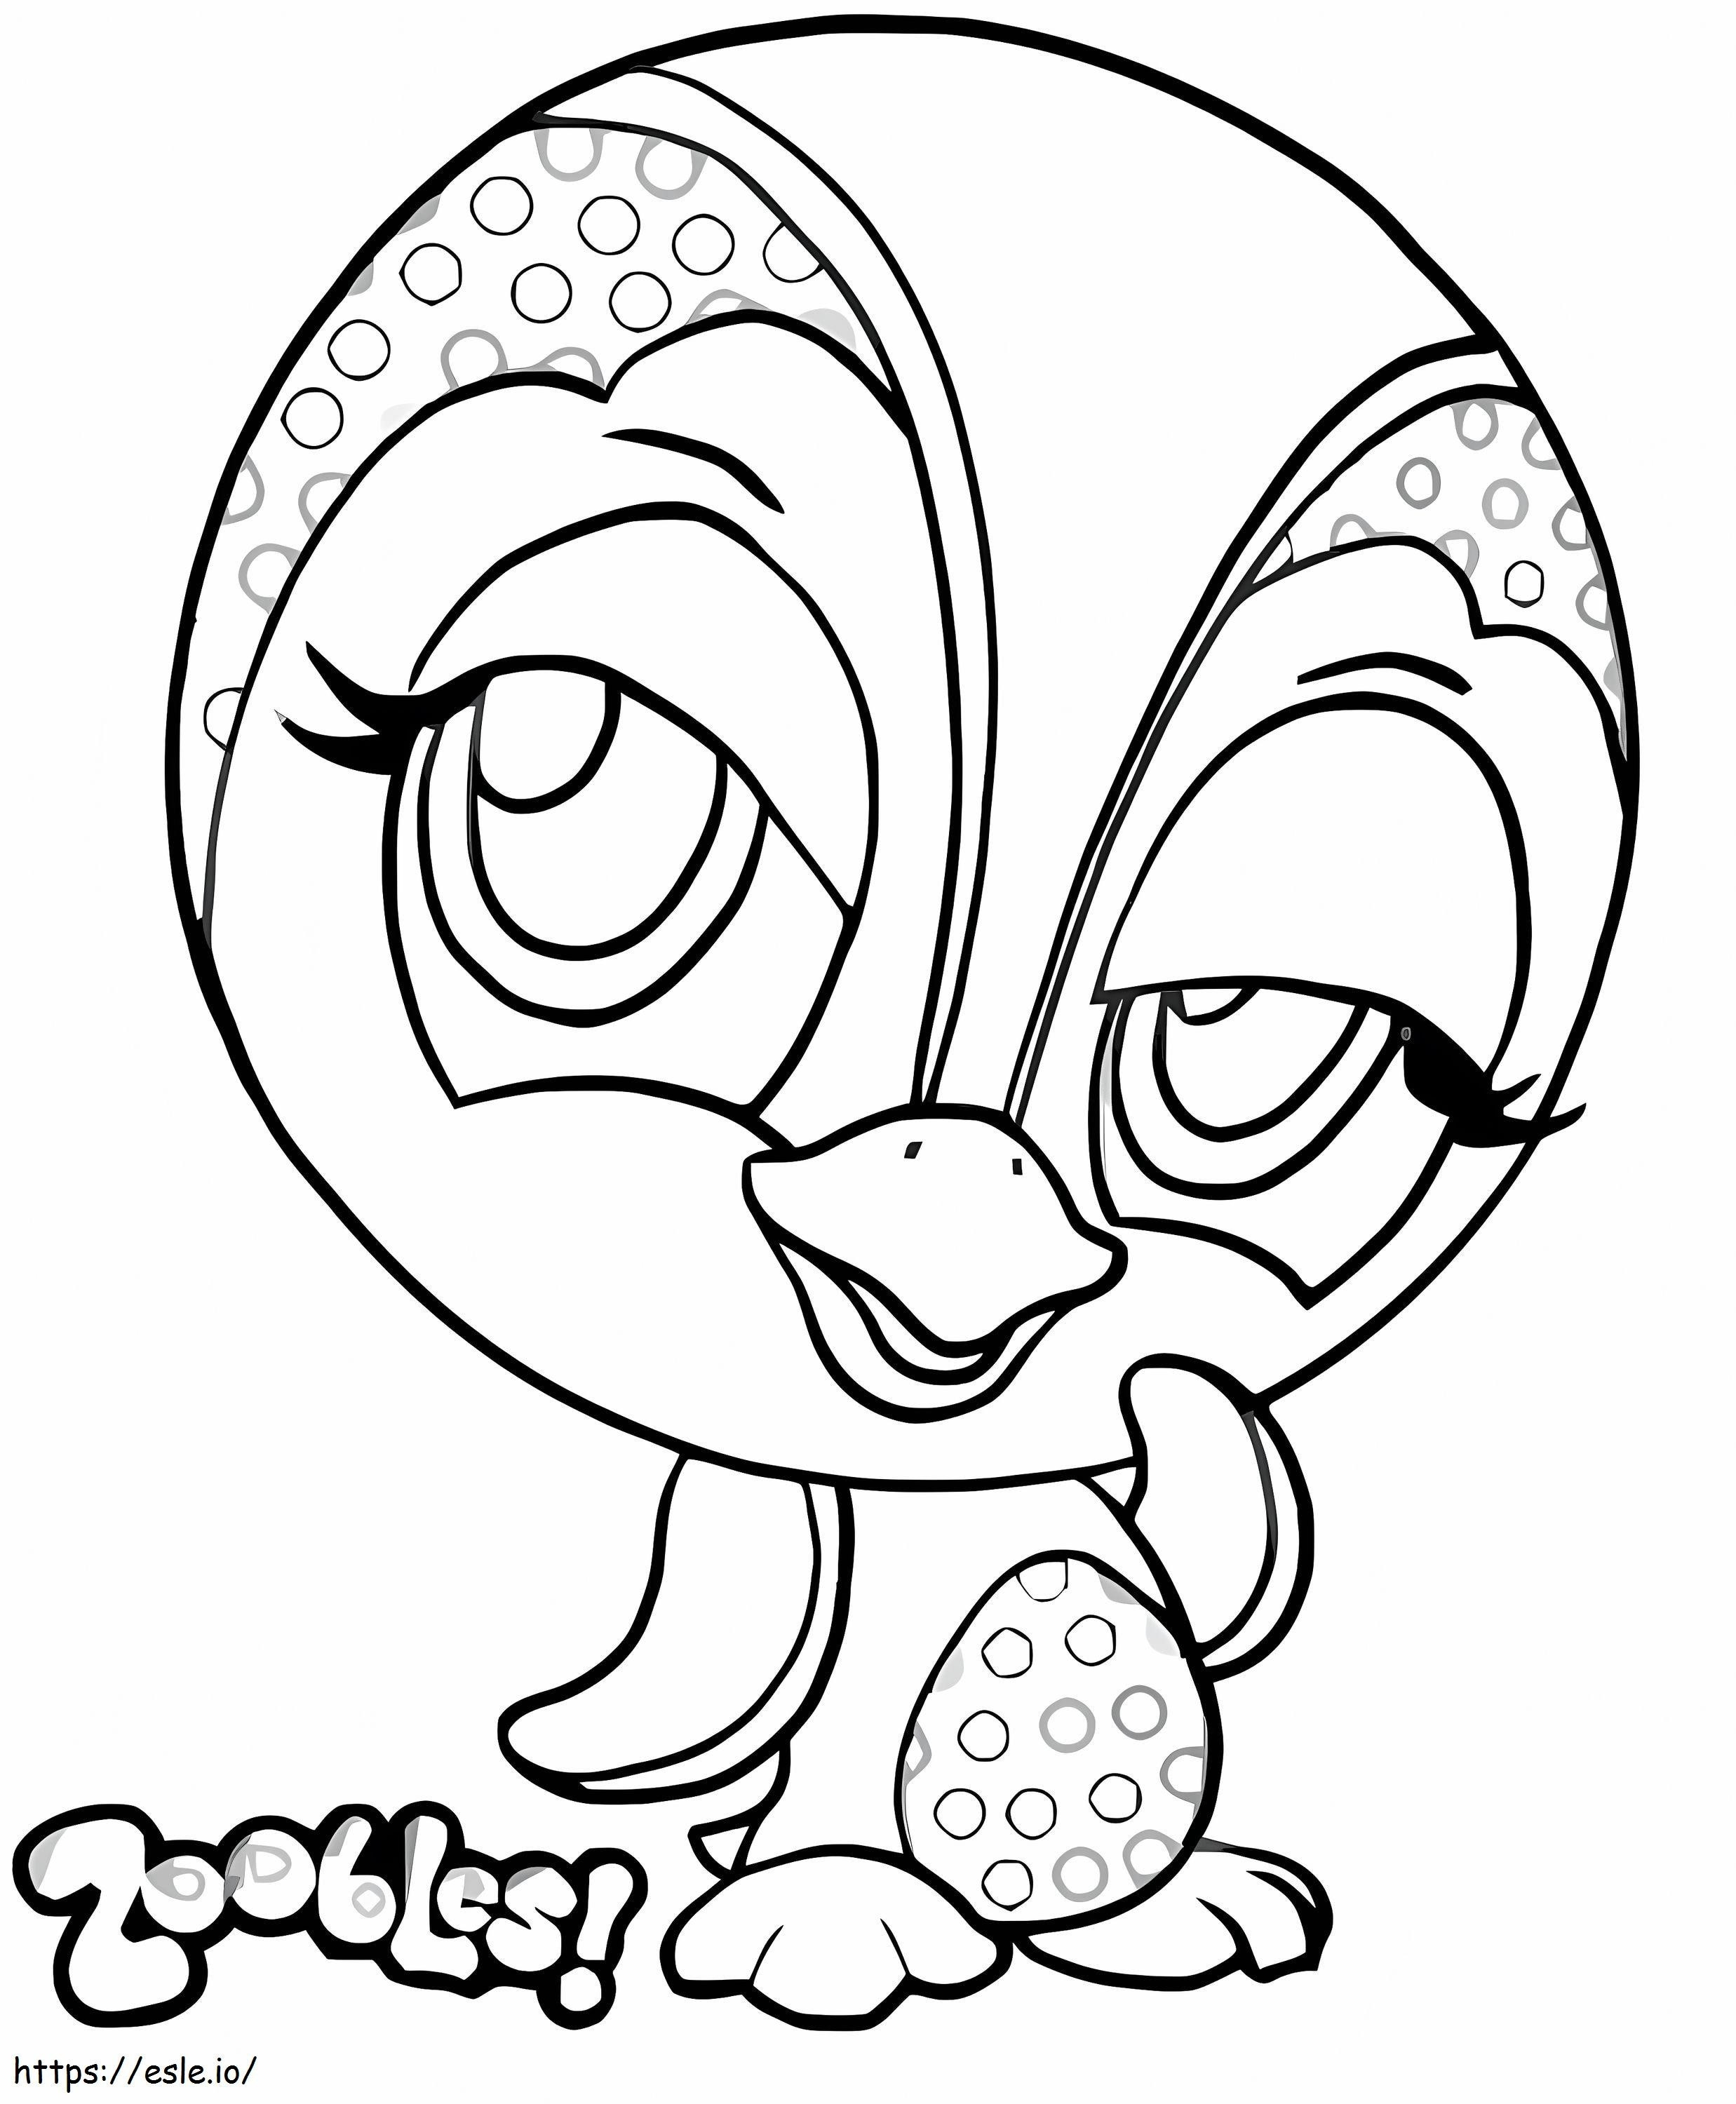 Penguin Zoobles coloring page